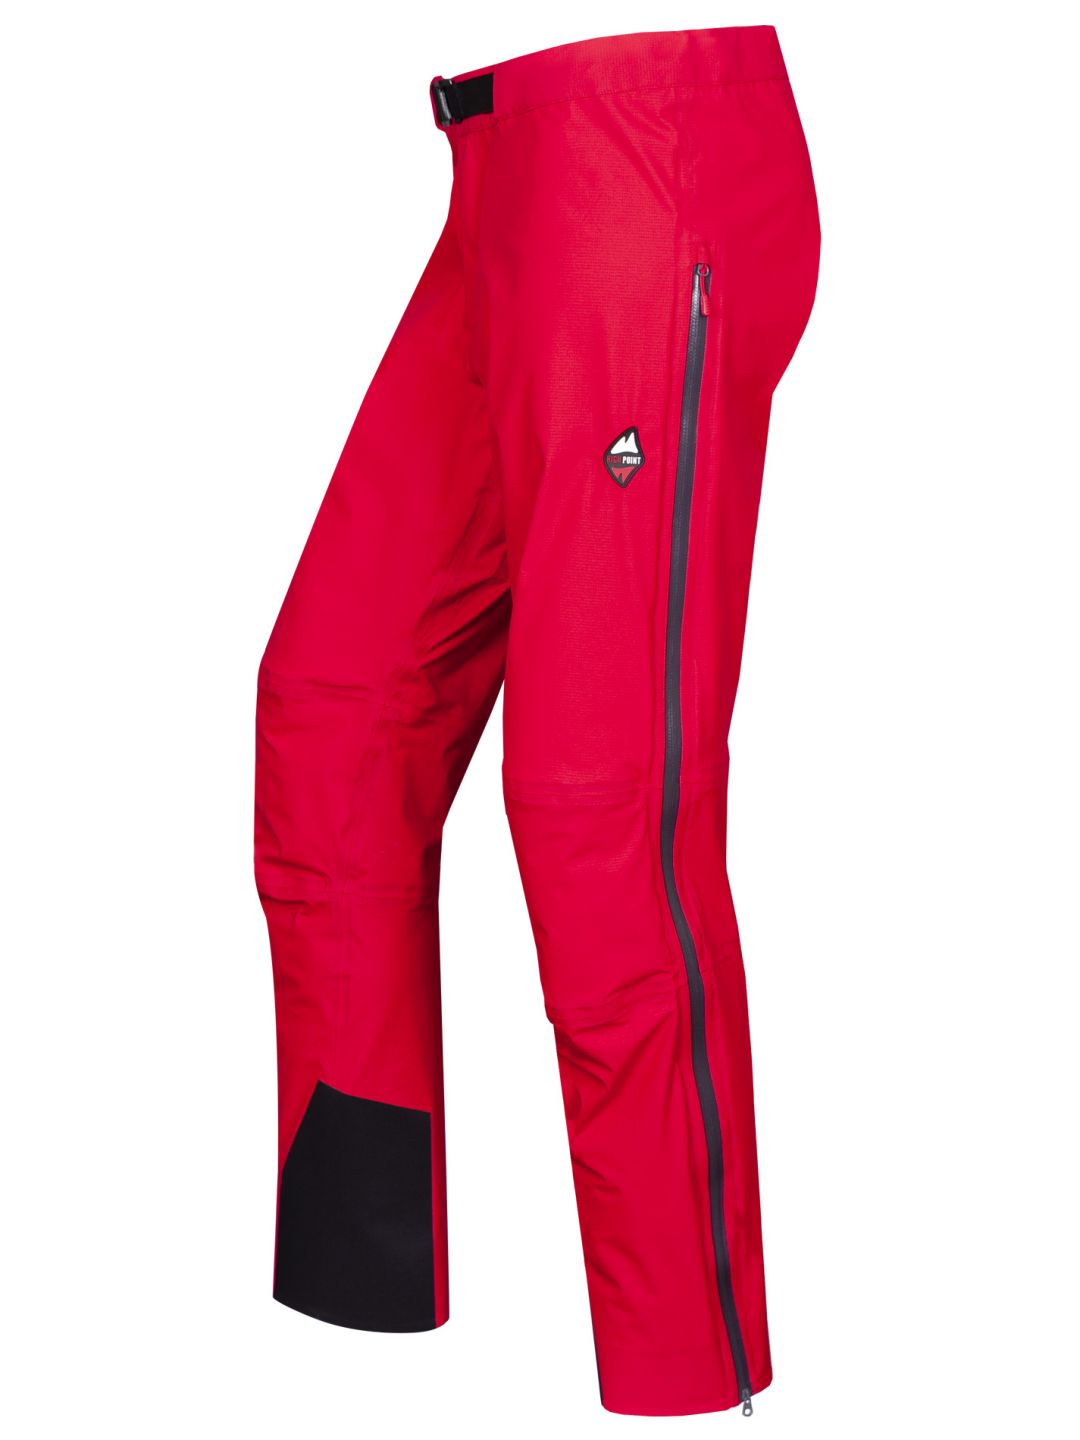 HIGH POINT CLIFF pants red varianta: XL